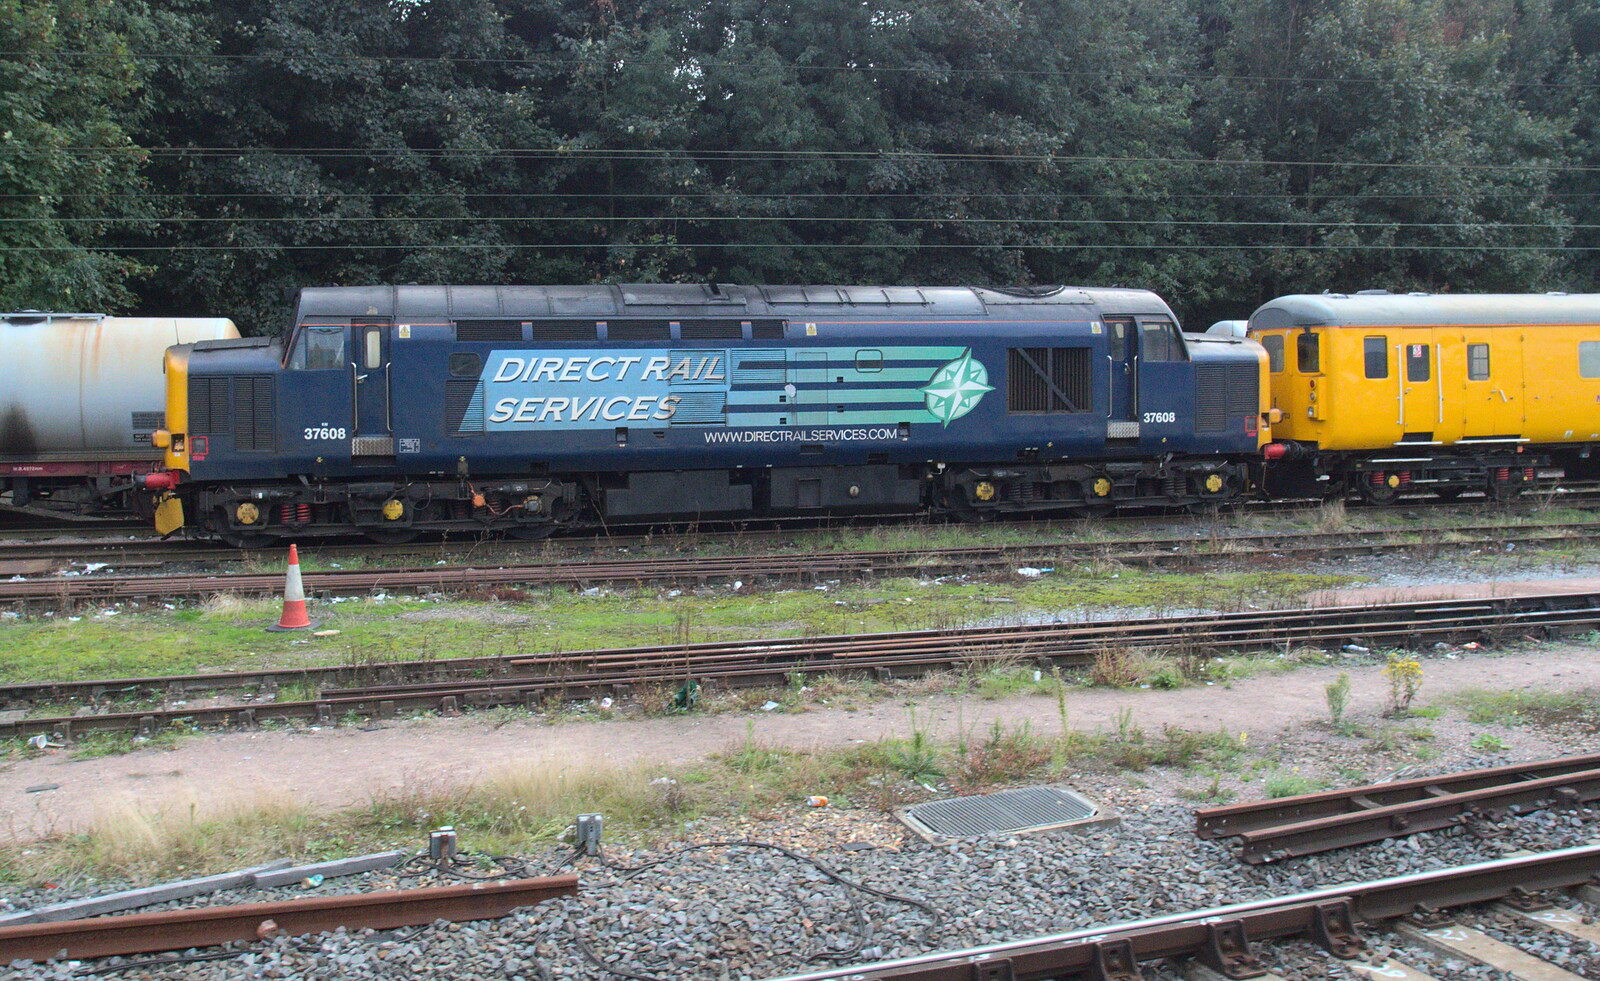 A Class 37 loco 37608 hauls a 'flying banana' from New Railway and a Trip to Ikea, Ipswich and Thurrock - 19th September 2014